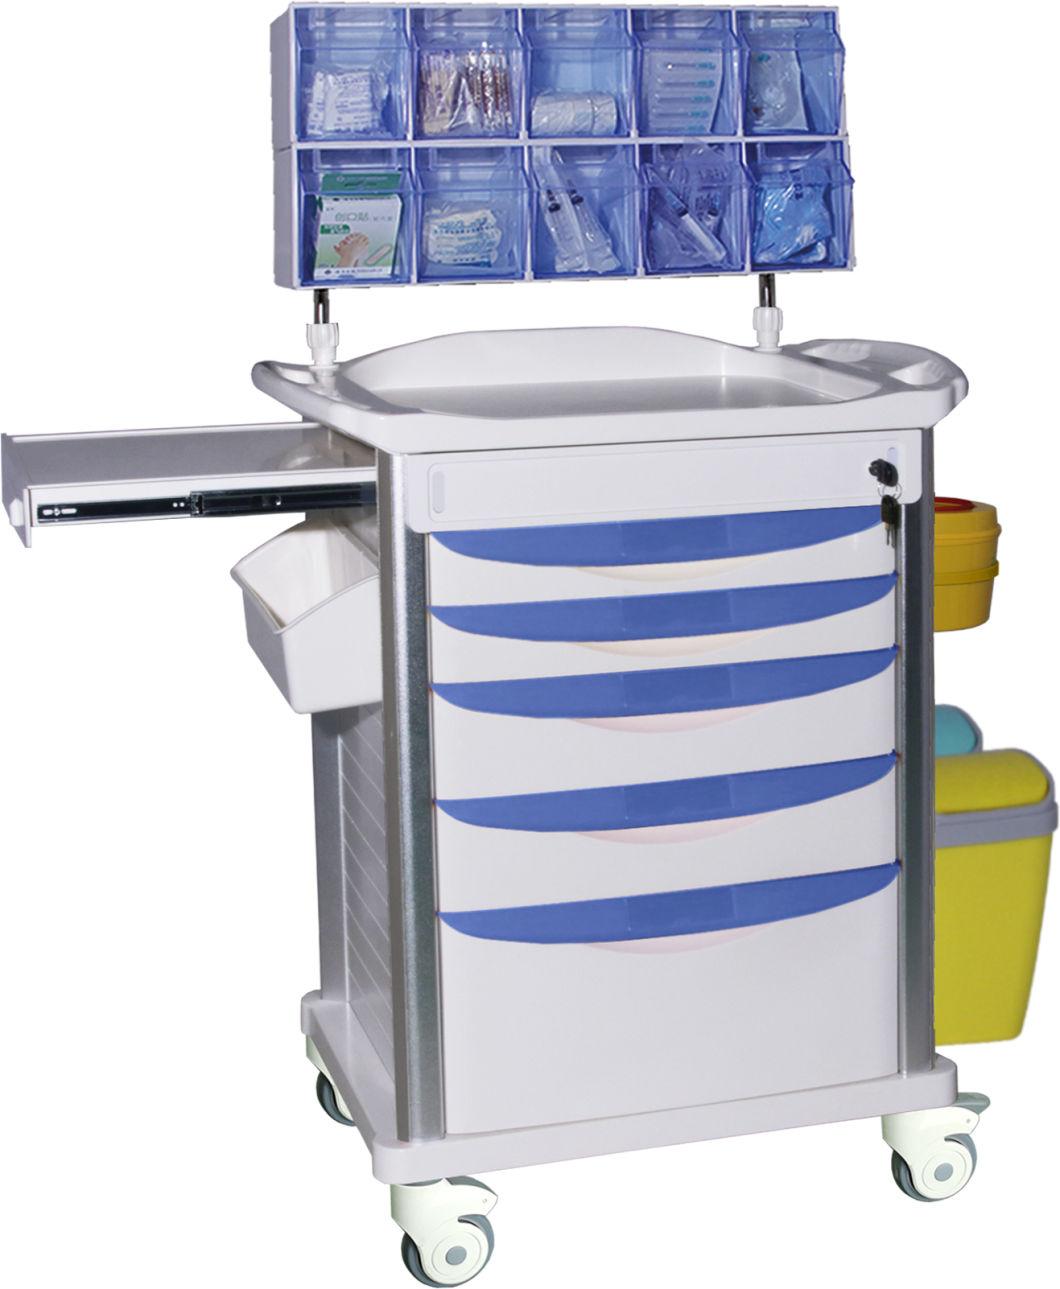 Mn-AC008 5 Layers Medical Device Anesthesia Trolley with Swivel Casters